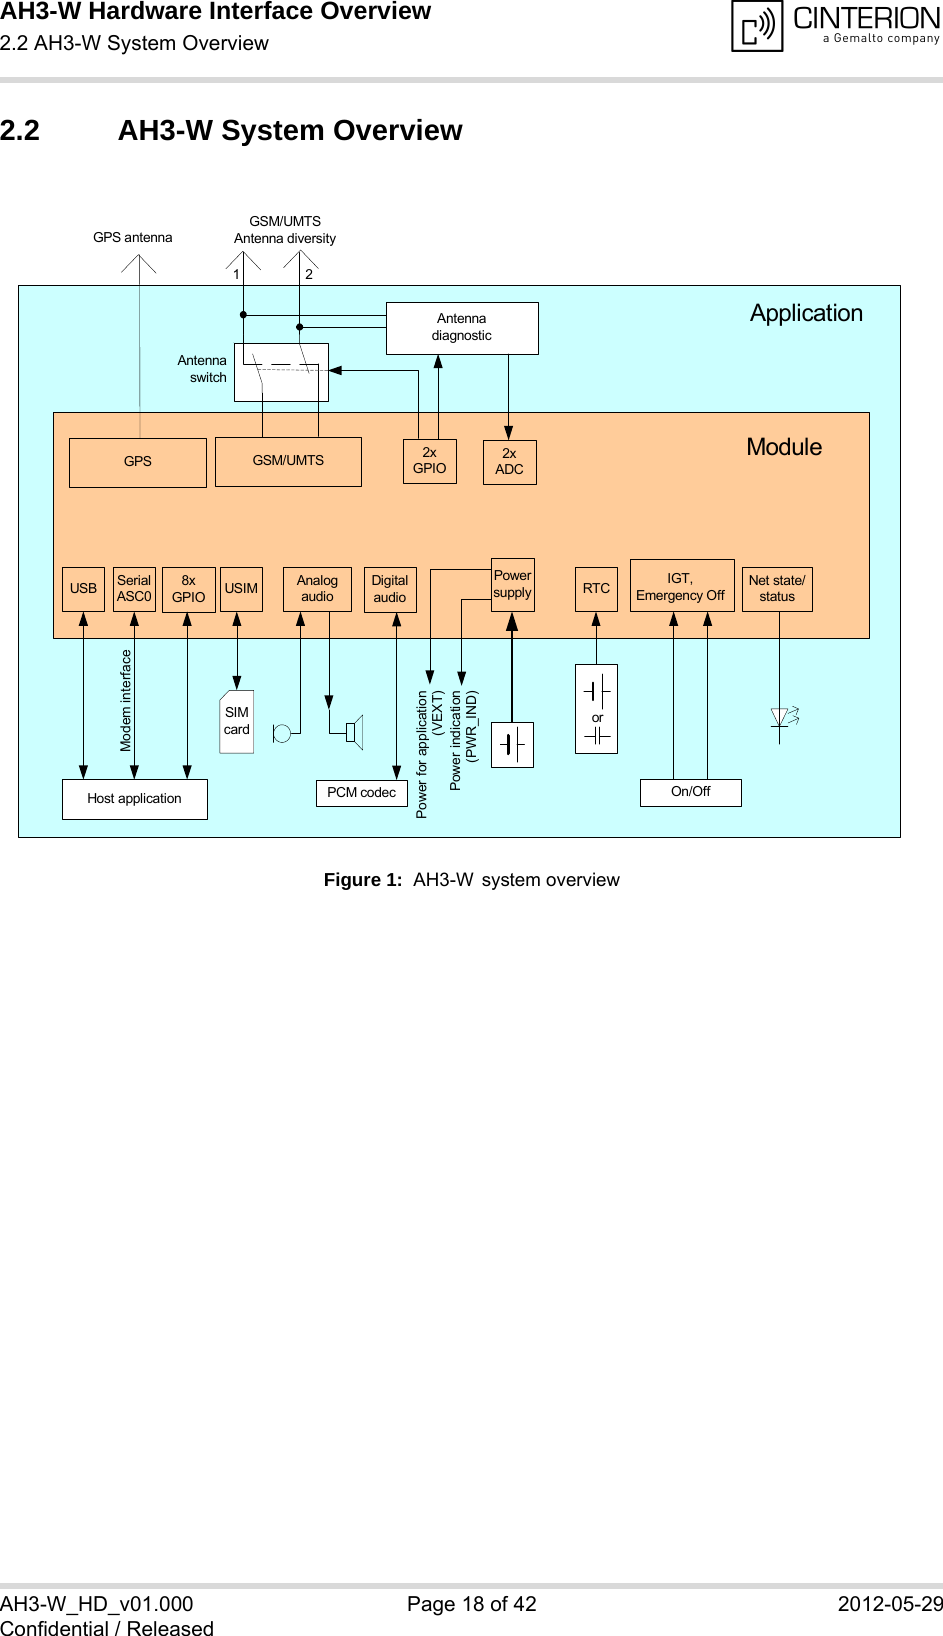 AH3-W Hardware Interface Overview2.2 AH3-W System Overview18AH3-W_HD_v01.000 Page 18 of 42 2012-05-29Confidential / Released2.2 AH3-W System OverviewFigure 1:  AH3-W system overviewUSB SerialASC0 USIM AnalogaudioPowersupply RTC IGT,Emergency OffNet state/statusSIMcardHost application On/OffModuleApplicationorGSM/UMTS Antenna diversityPower for application (VEXT)Power indication(PWR_IND)Modem interfaceDigitalaudioPCM codecGSM/UMTS12GPSGPS antenna8xGPIO2xGPIOAntenna diagnostic2xADCAntenna switch